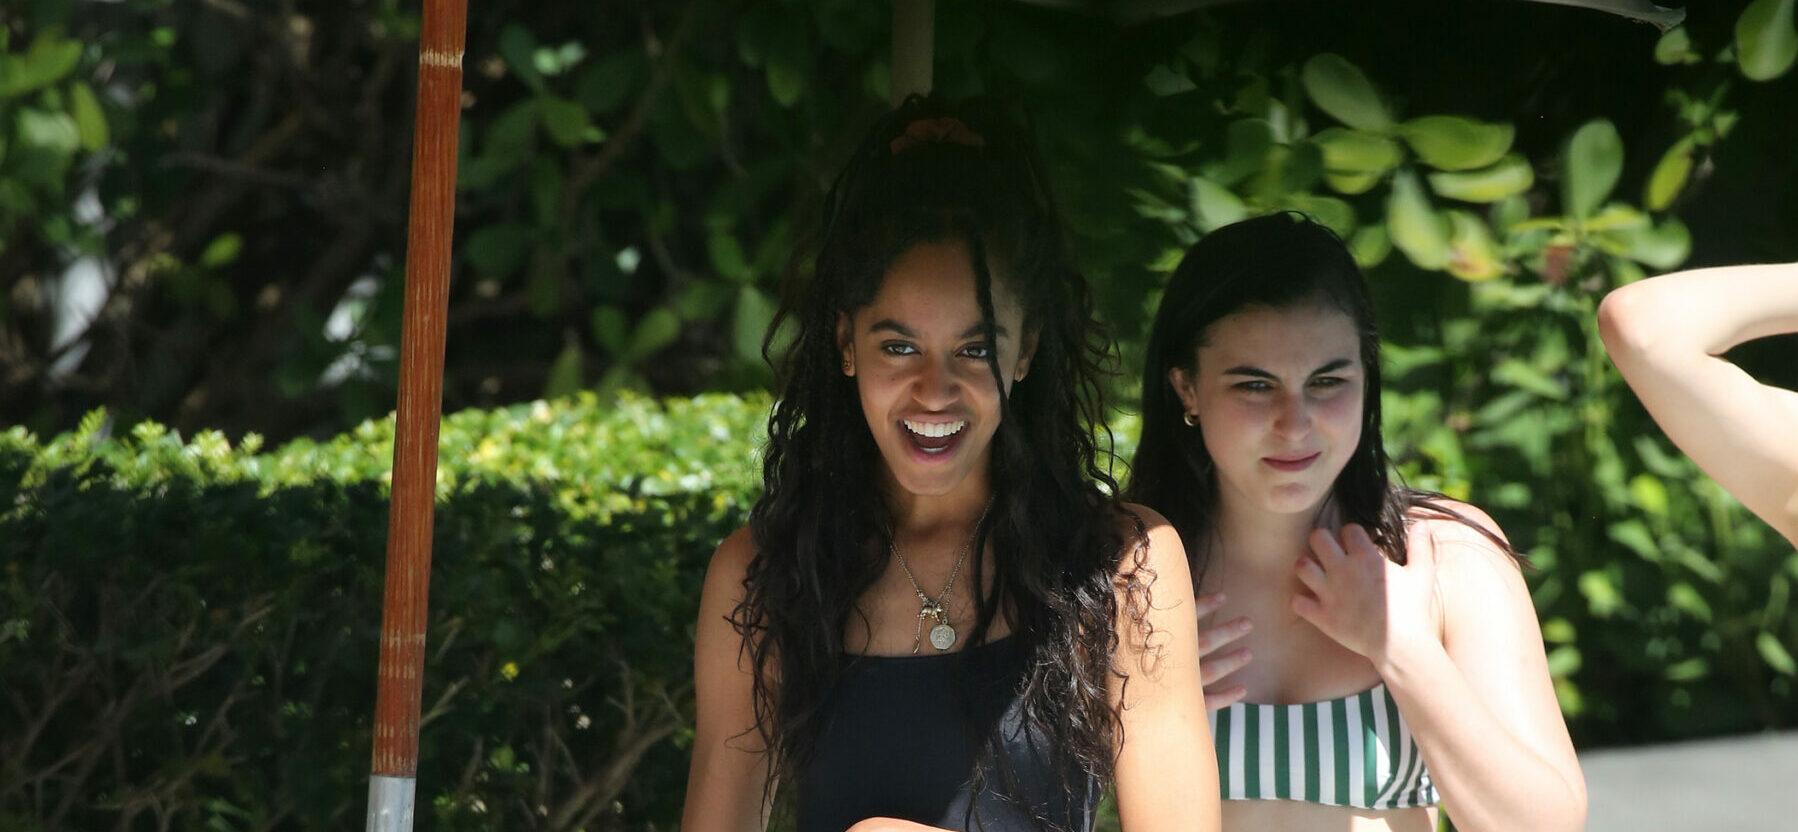 20 year old former First Daughter Malia Obama wears a black swimsuit as she drinks wine with friends by the pool in Miami. 17 Feb 2019 Pictured: Malia Obama. Photo credit: MEGA TheMegaAgency.com +1 888 505 6342 (Mega Agency TagID: MEGA361609_012.jpg) [Photo via Mega Agency]